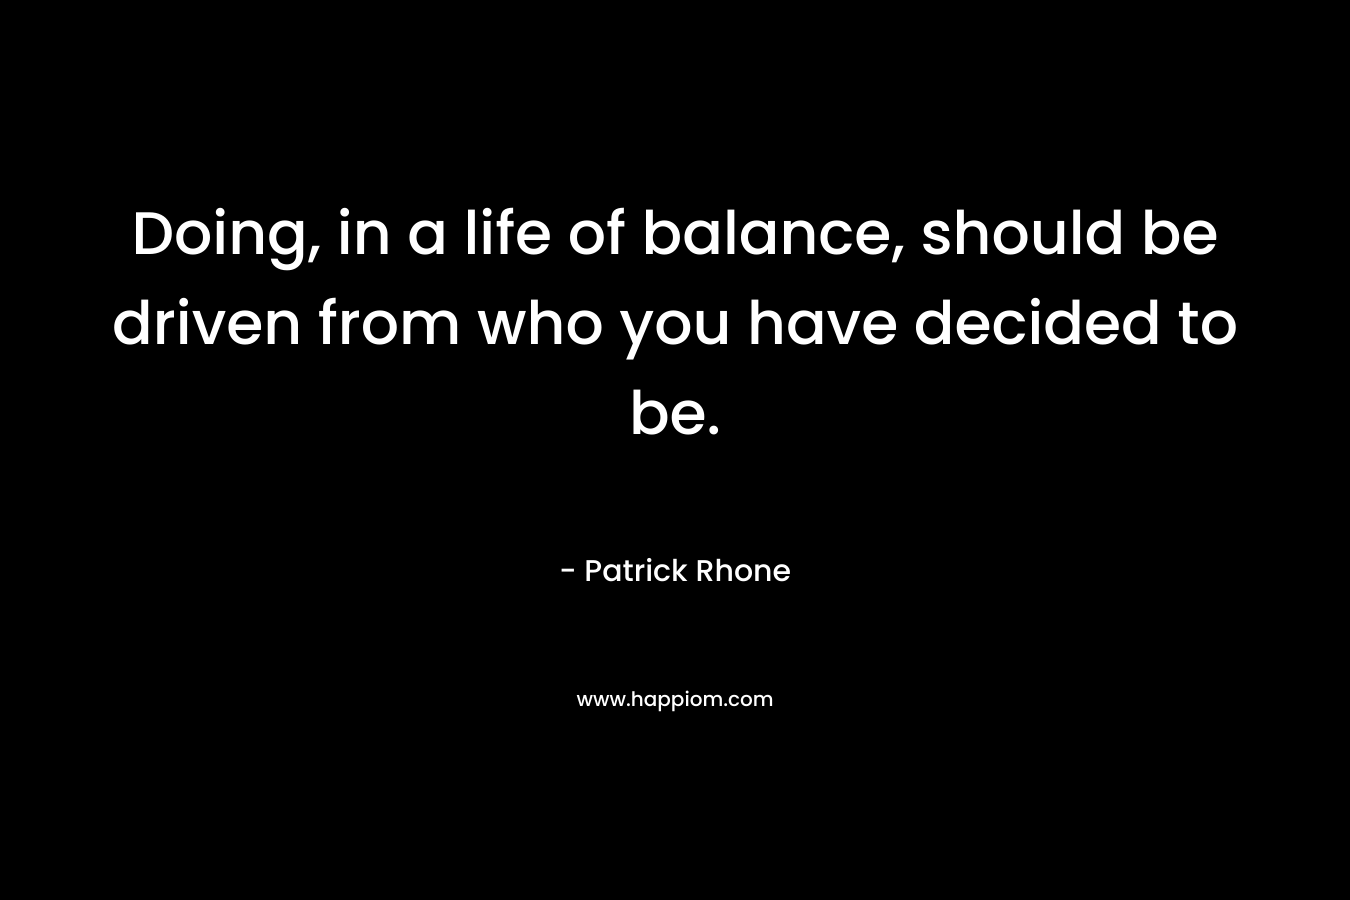 Doing, in a life of balance, should be driven from who you have decided to be. – Patrick Rhone